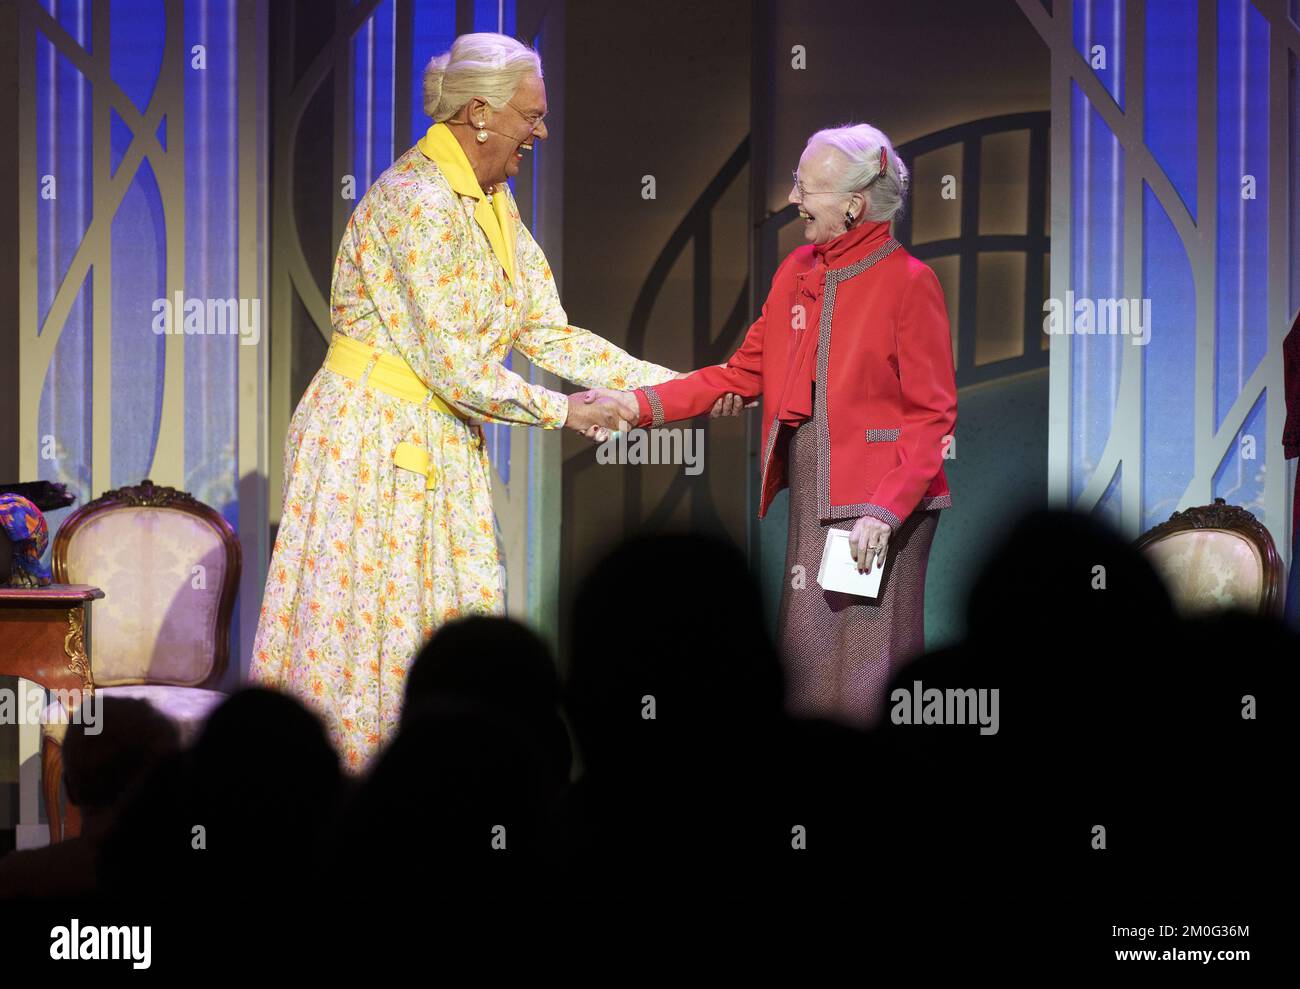 Queen Margrethe Surprising Danish revue icon Ulf Pilgaard on stage, as he retires from the revue scene, after 40 seasons. Sunday, October 3, 2021. The 80-year-old actor appeared on stage, wearing a yellow dress portraying the Queen Margrethe, when the real Queen appeared on stage and thanked him for his many parodies of her. (Photo: Keld Navntoft/Ritzau Scanpix) Stock Photo